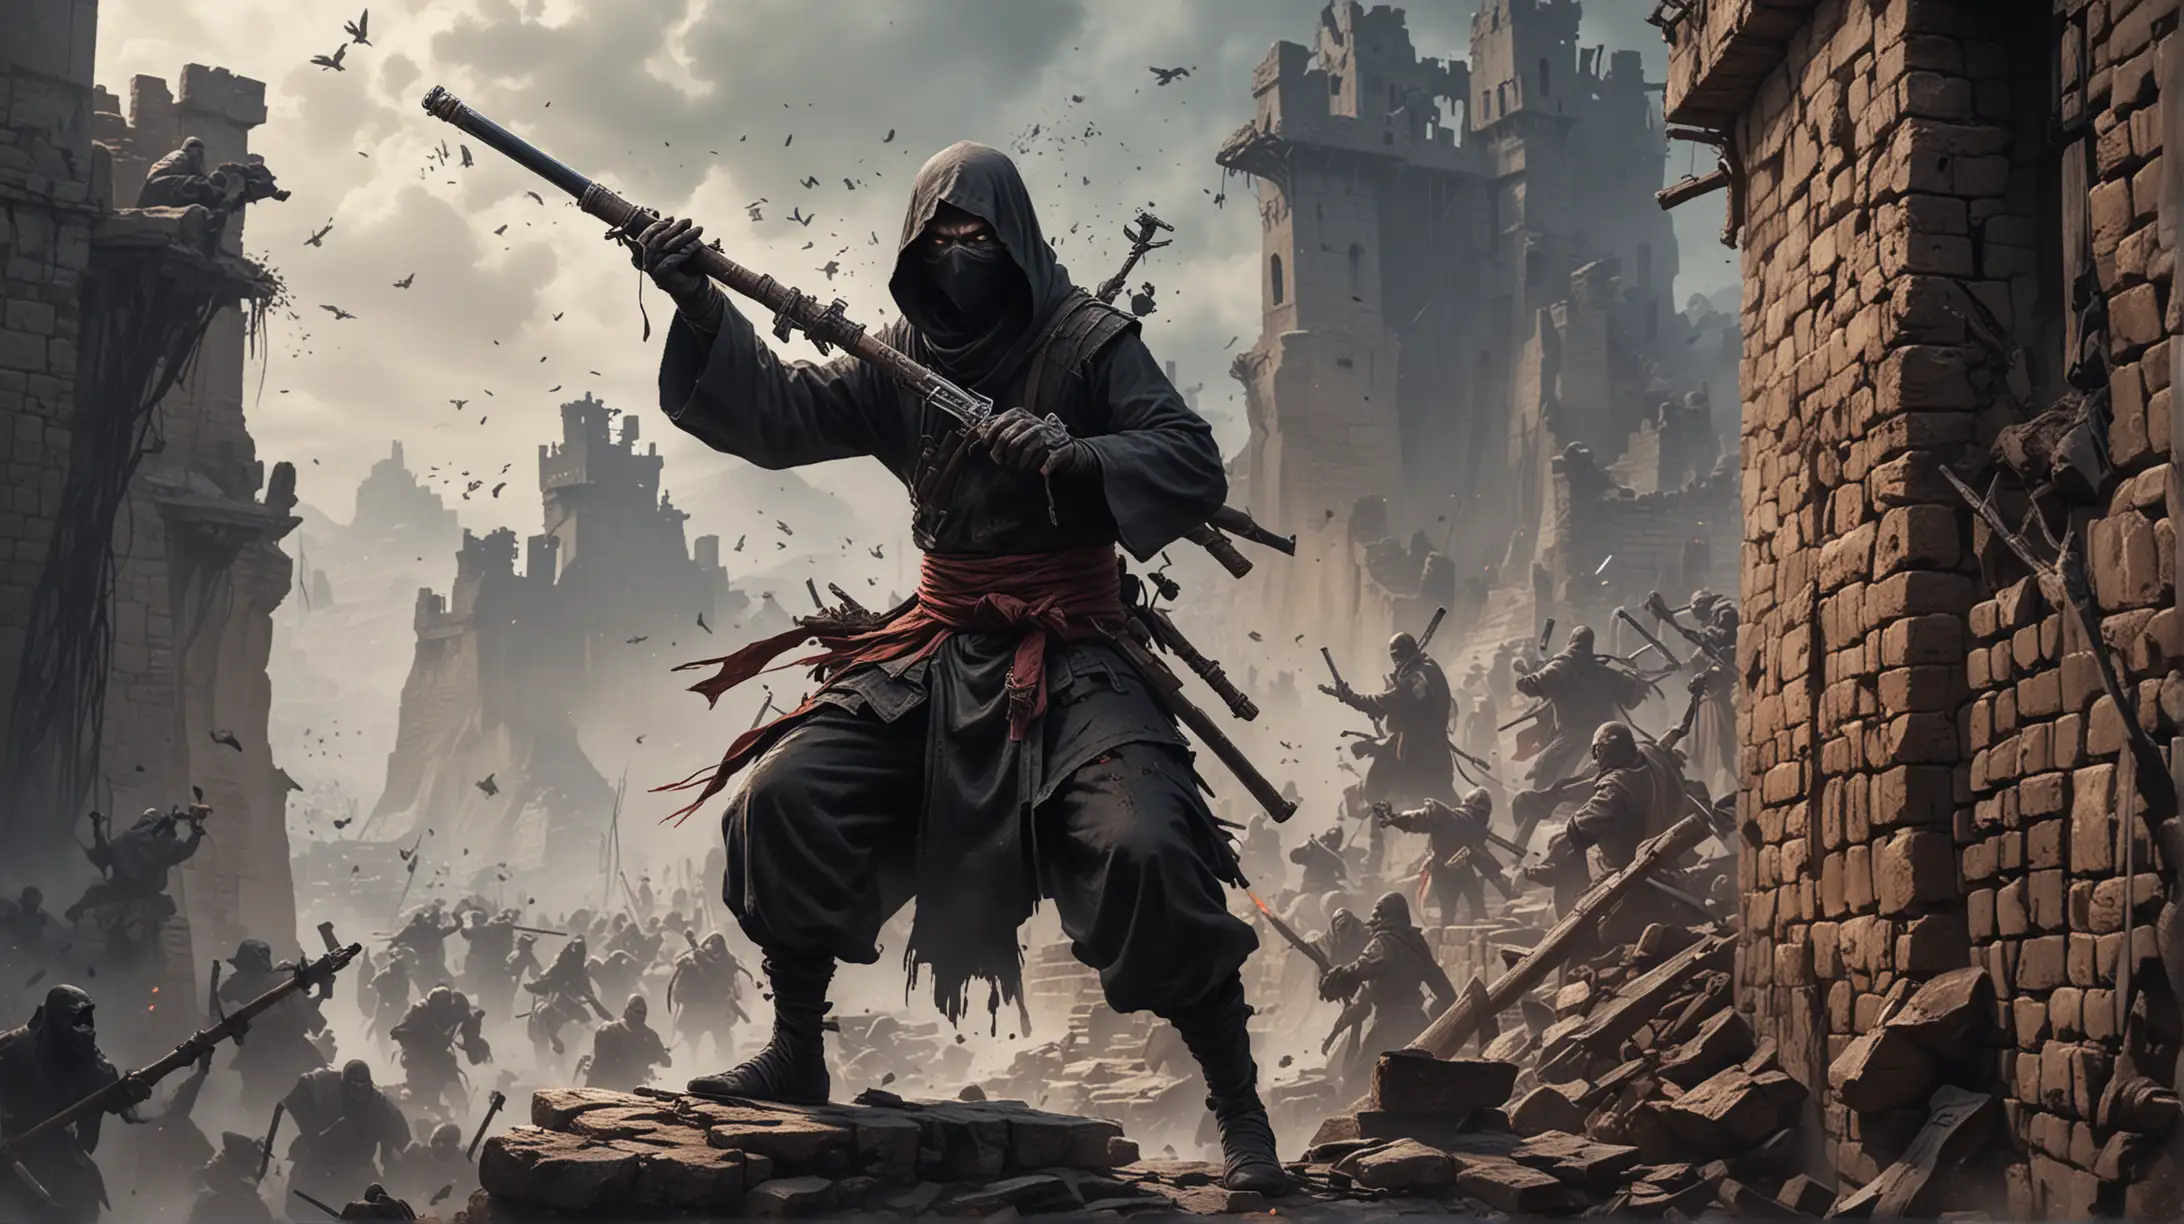 Masked Monk Ninja Firing Musket from Crumbling Fort Amid Undead Horde